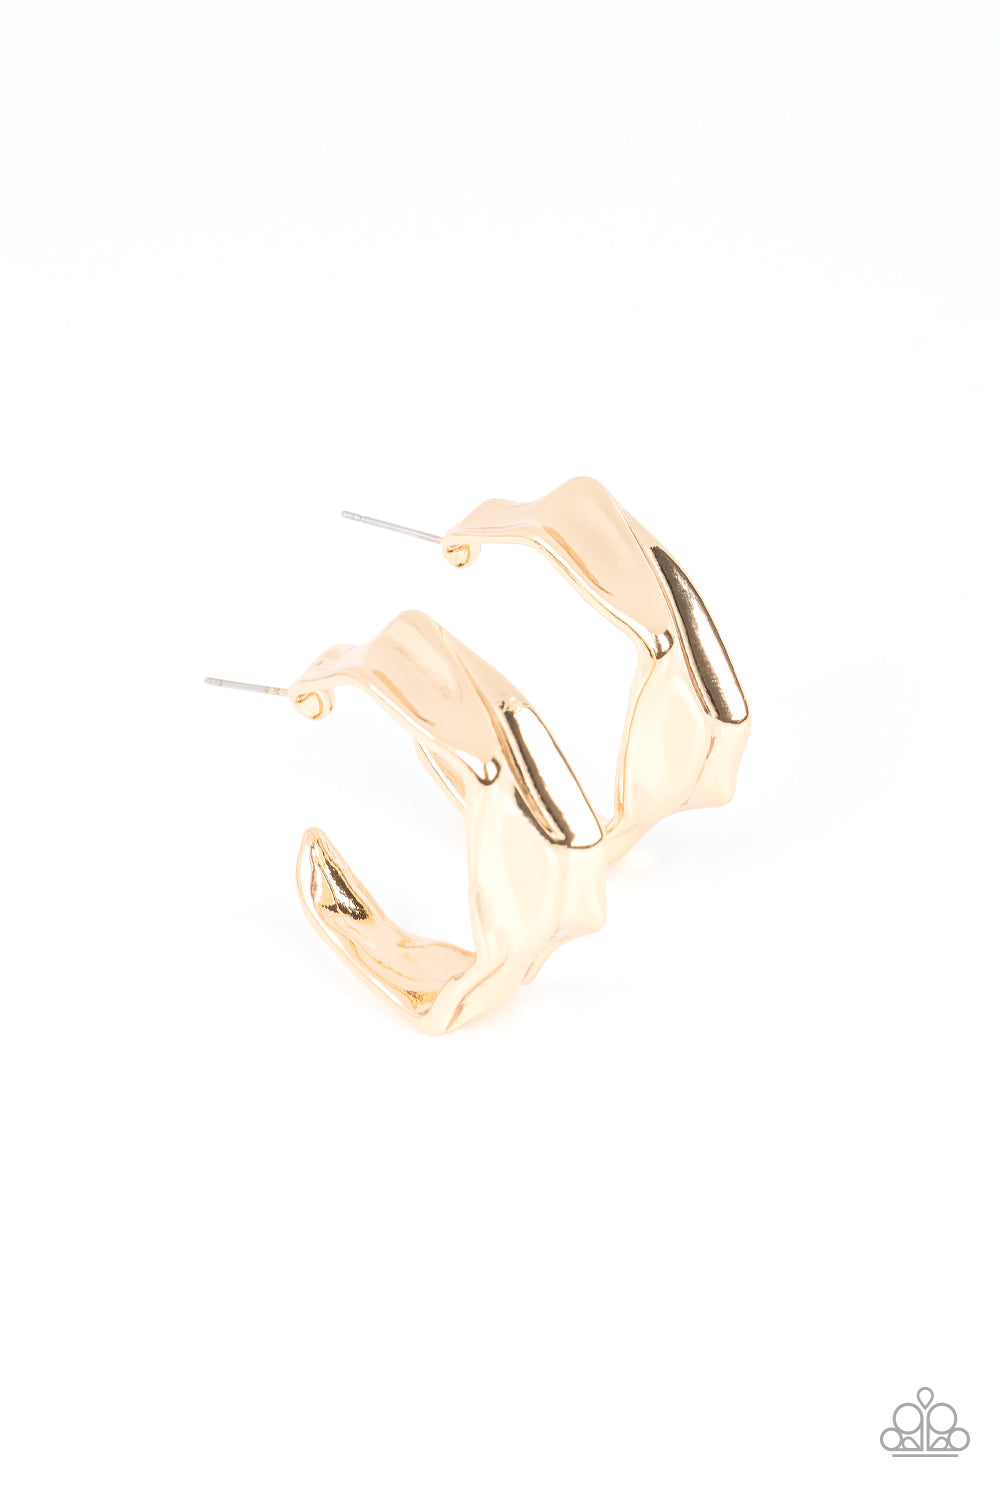 Cutting Edge Couture - Gold Warped Frame Paparazzi Hoop Earrings